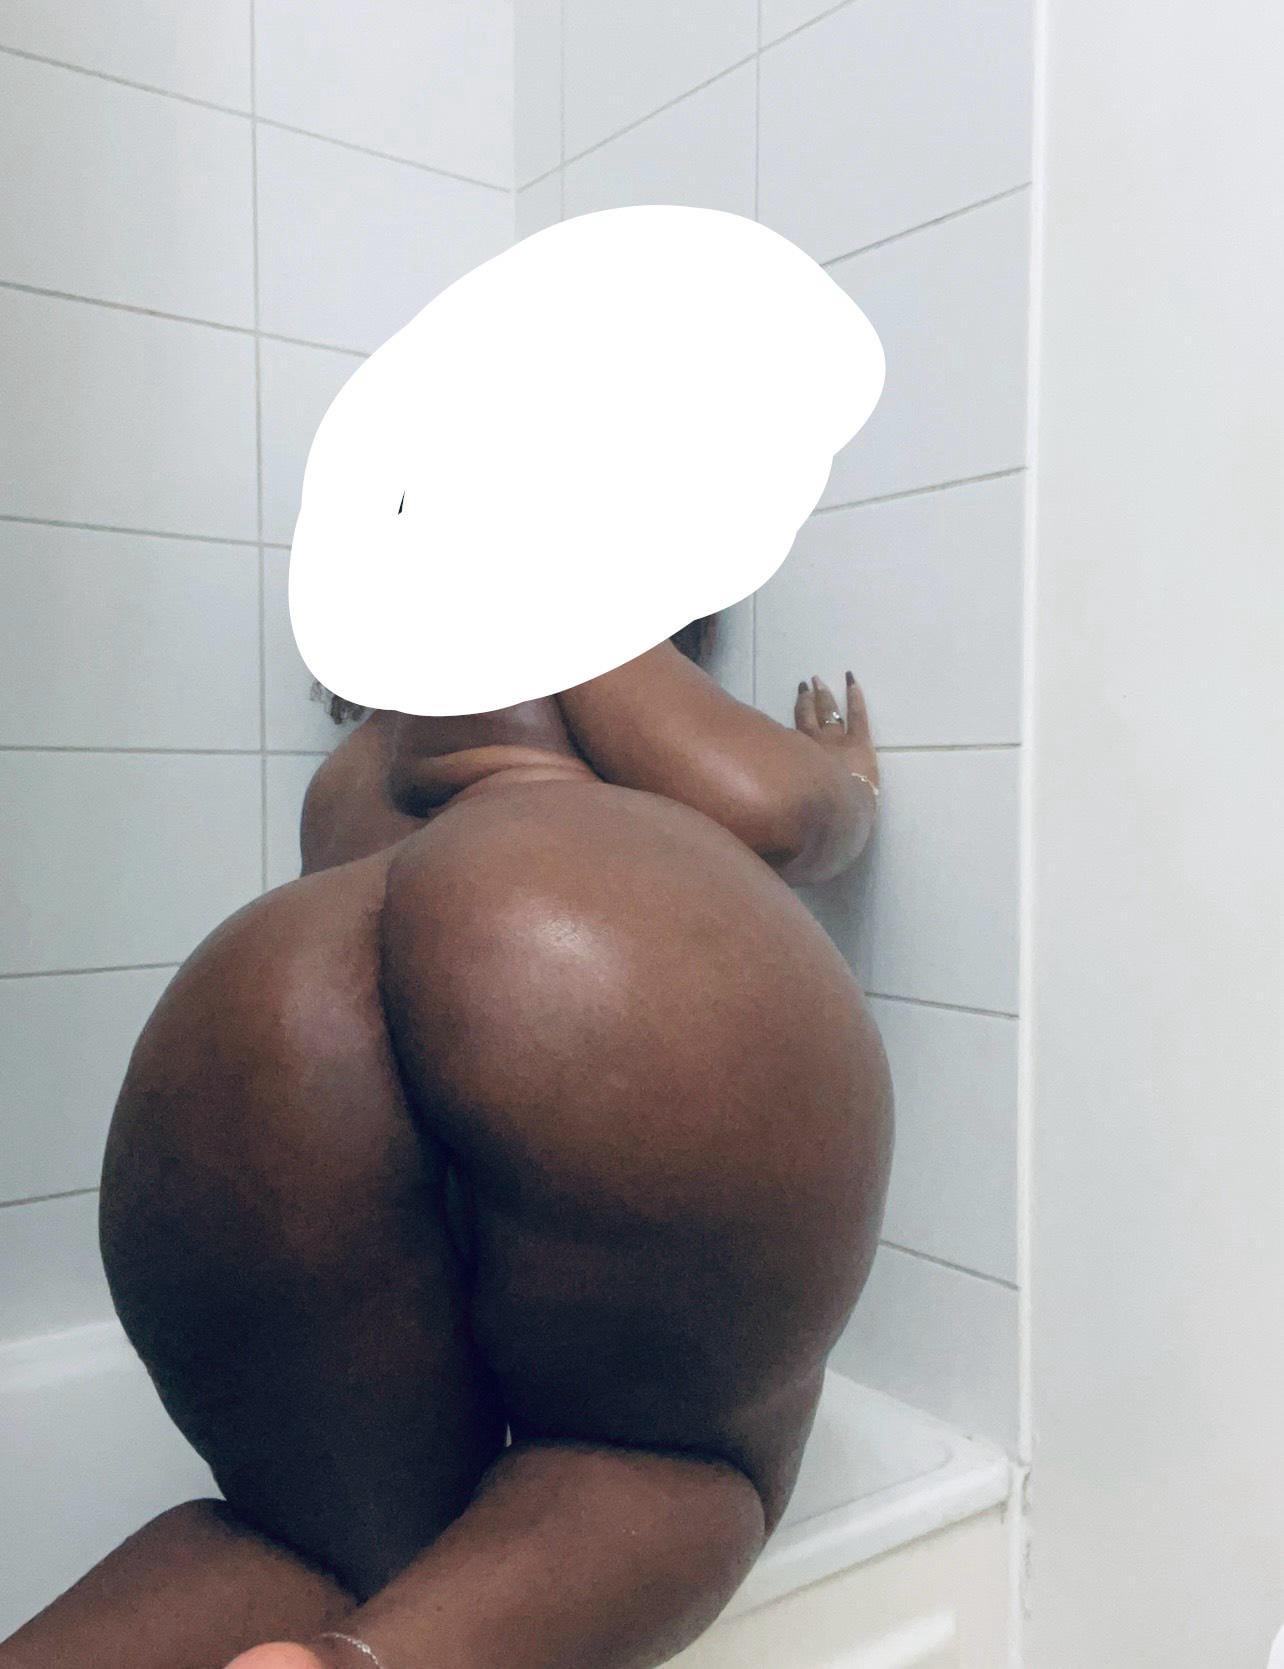 Showing off my chocolate ass